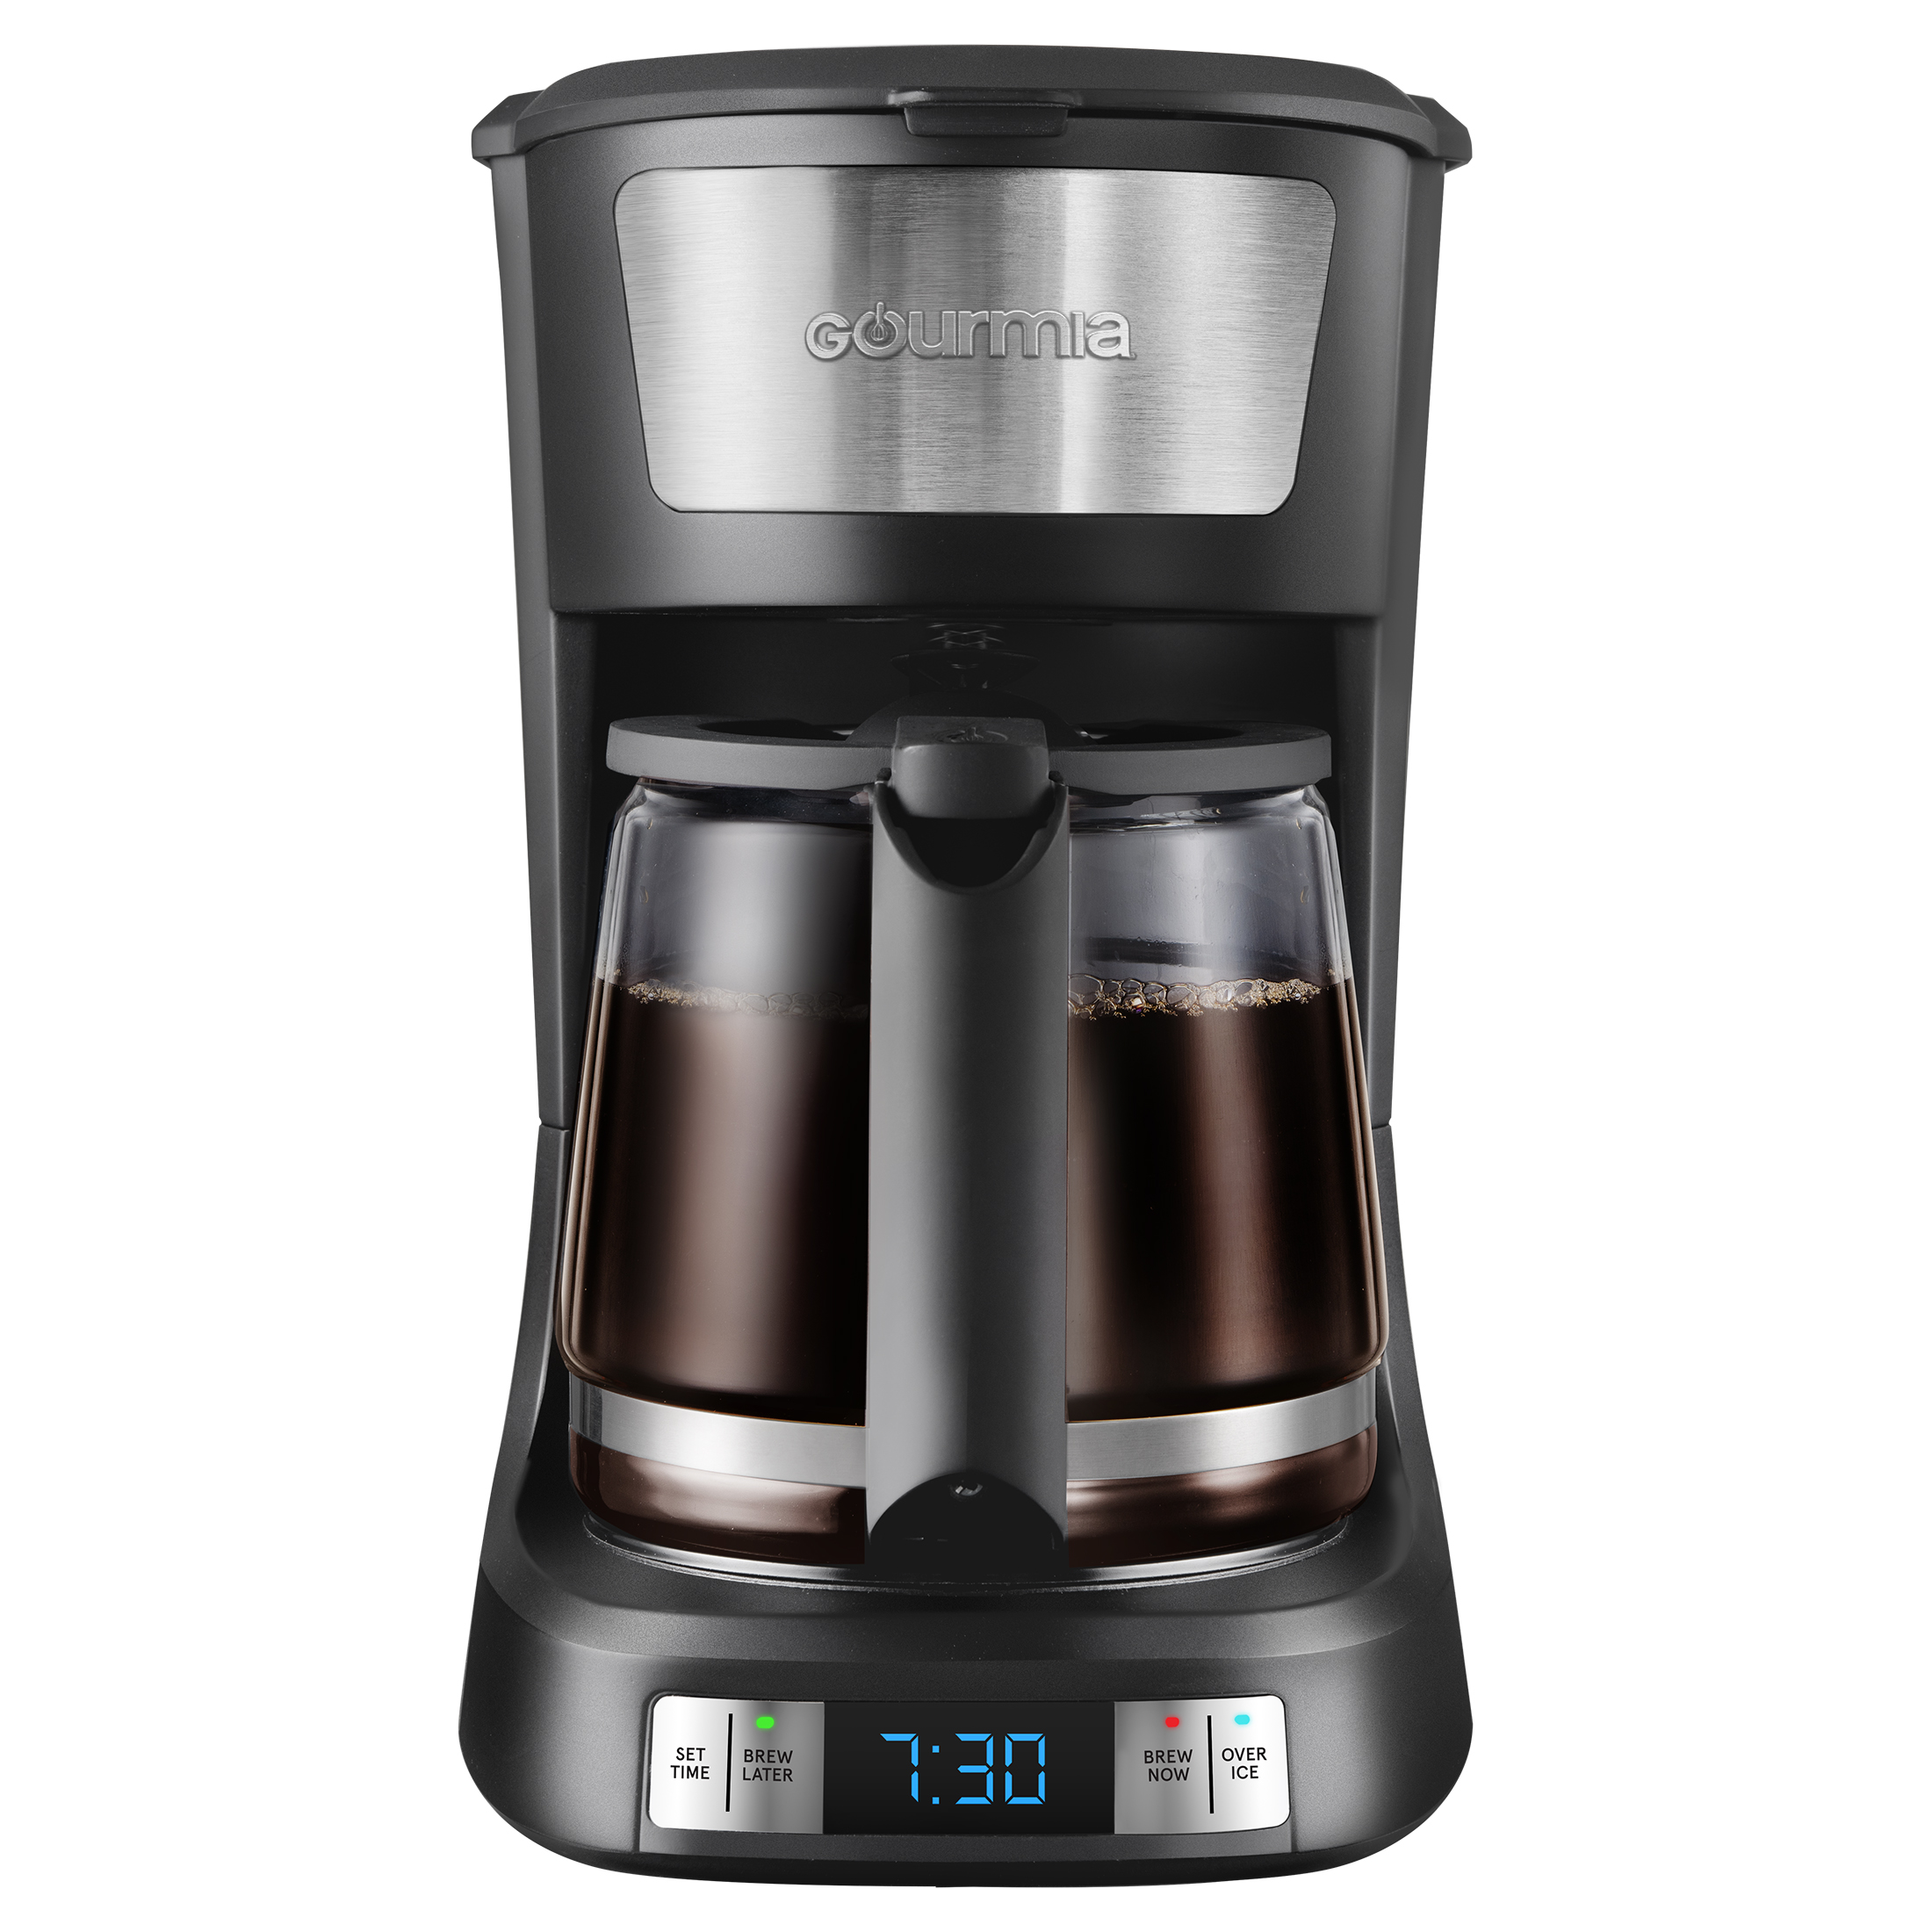 Gourmia 12 Cup Programmable Hot & Iced Coffee Maker with Keep Warm Feature - Black, New - image 3 of 7